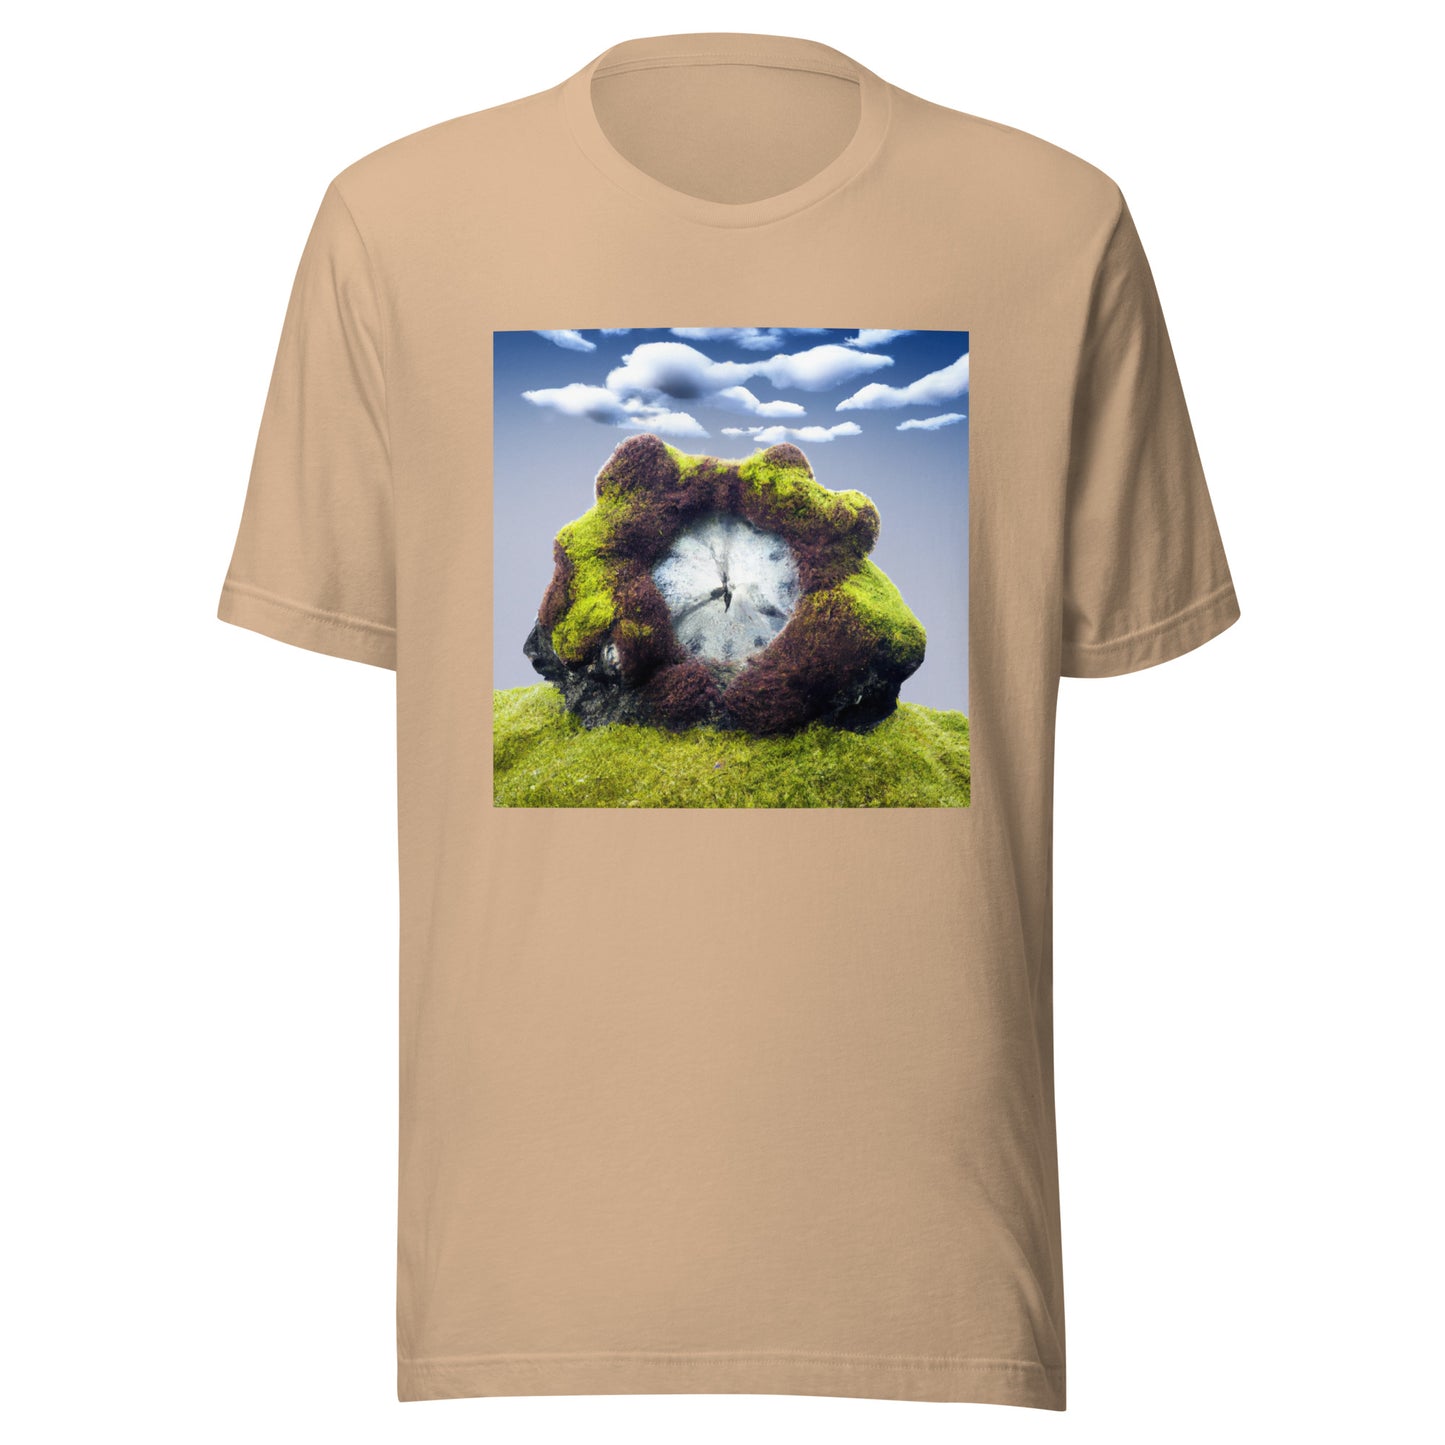 The Persistence of Moss - T Shirt